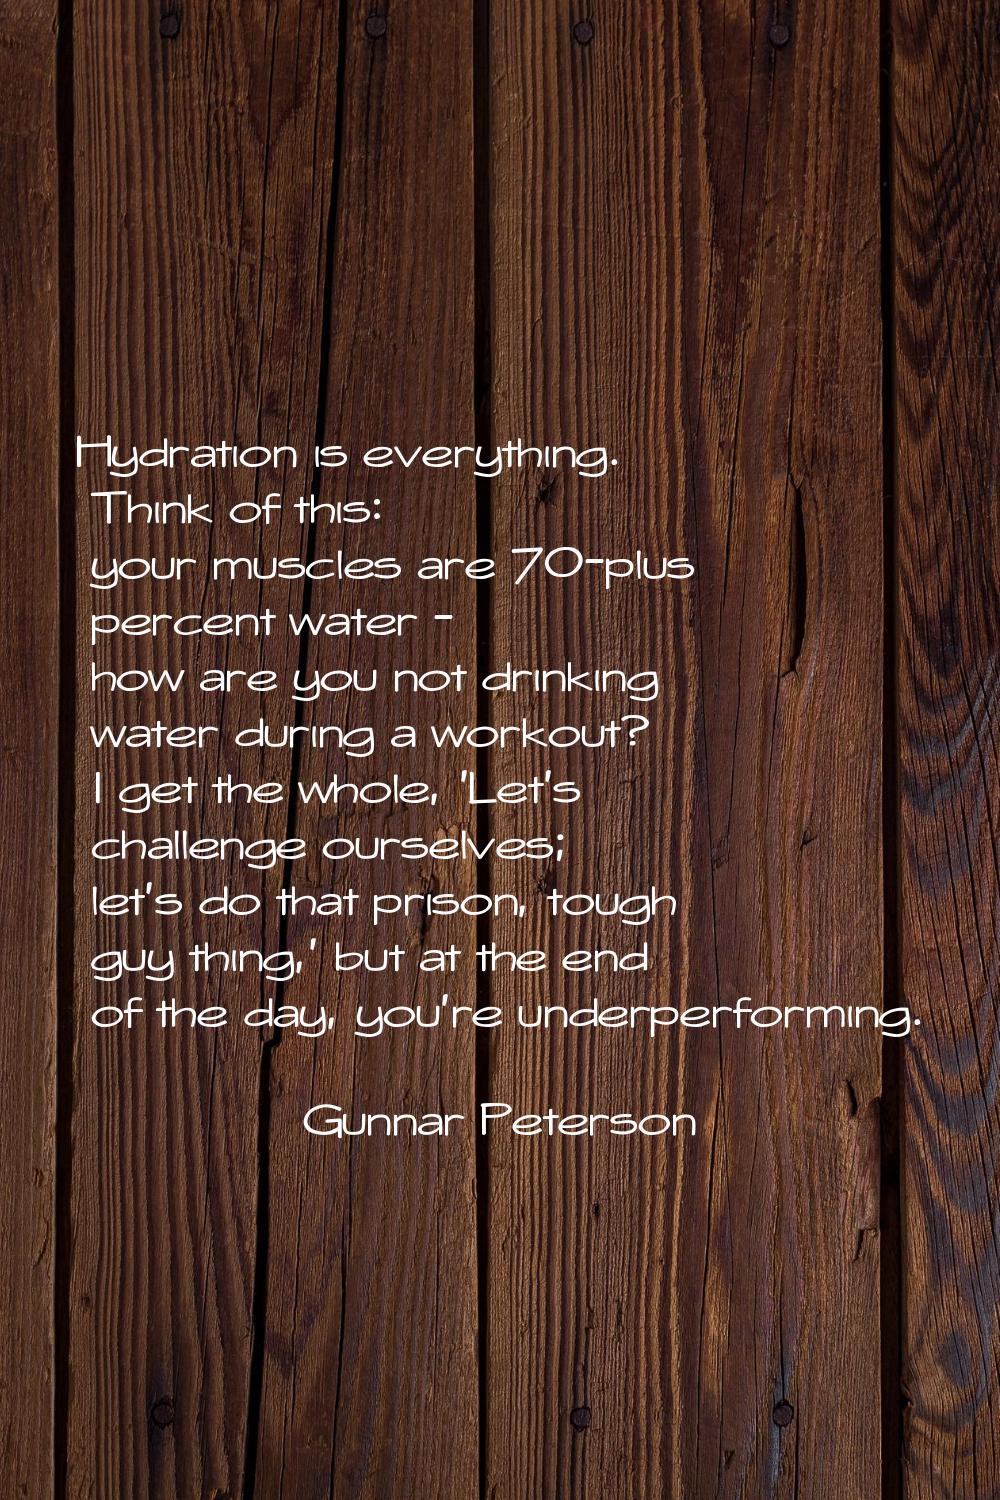 Hydration is everything. Think of this: your muscles are 70-plus percent water - how are you not dr